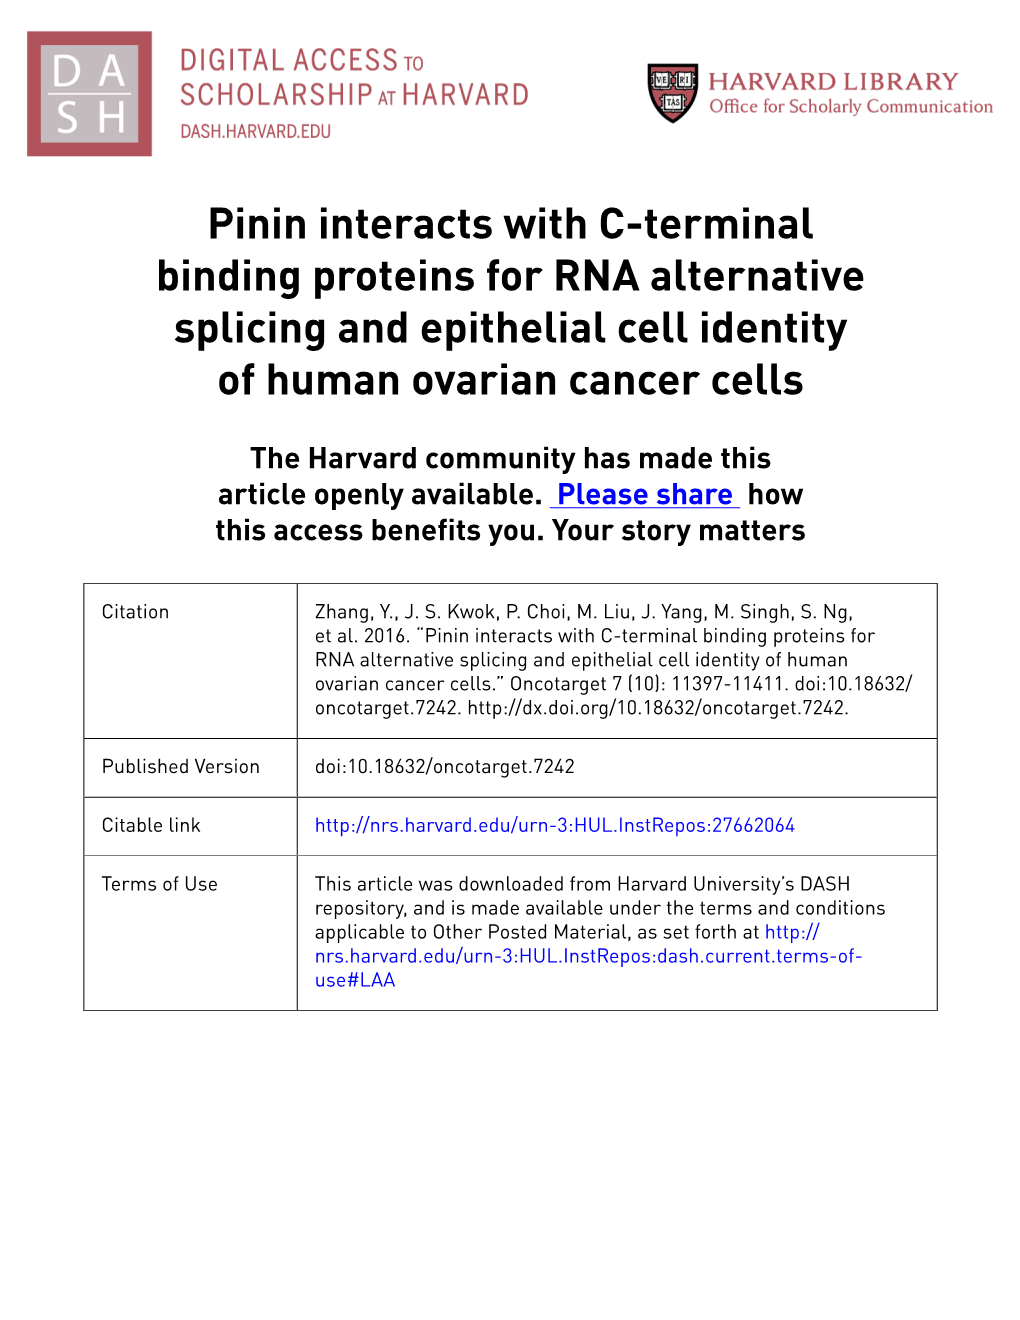 Pinin Interacts with C-Terminal Binding Proteins for RNA Alternative Splicing and Epithelial Cell Identity of Human Ovarian Cancer Cells